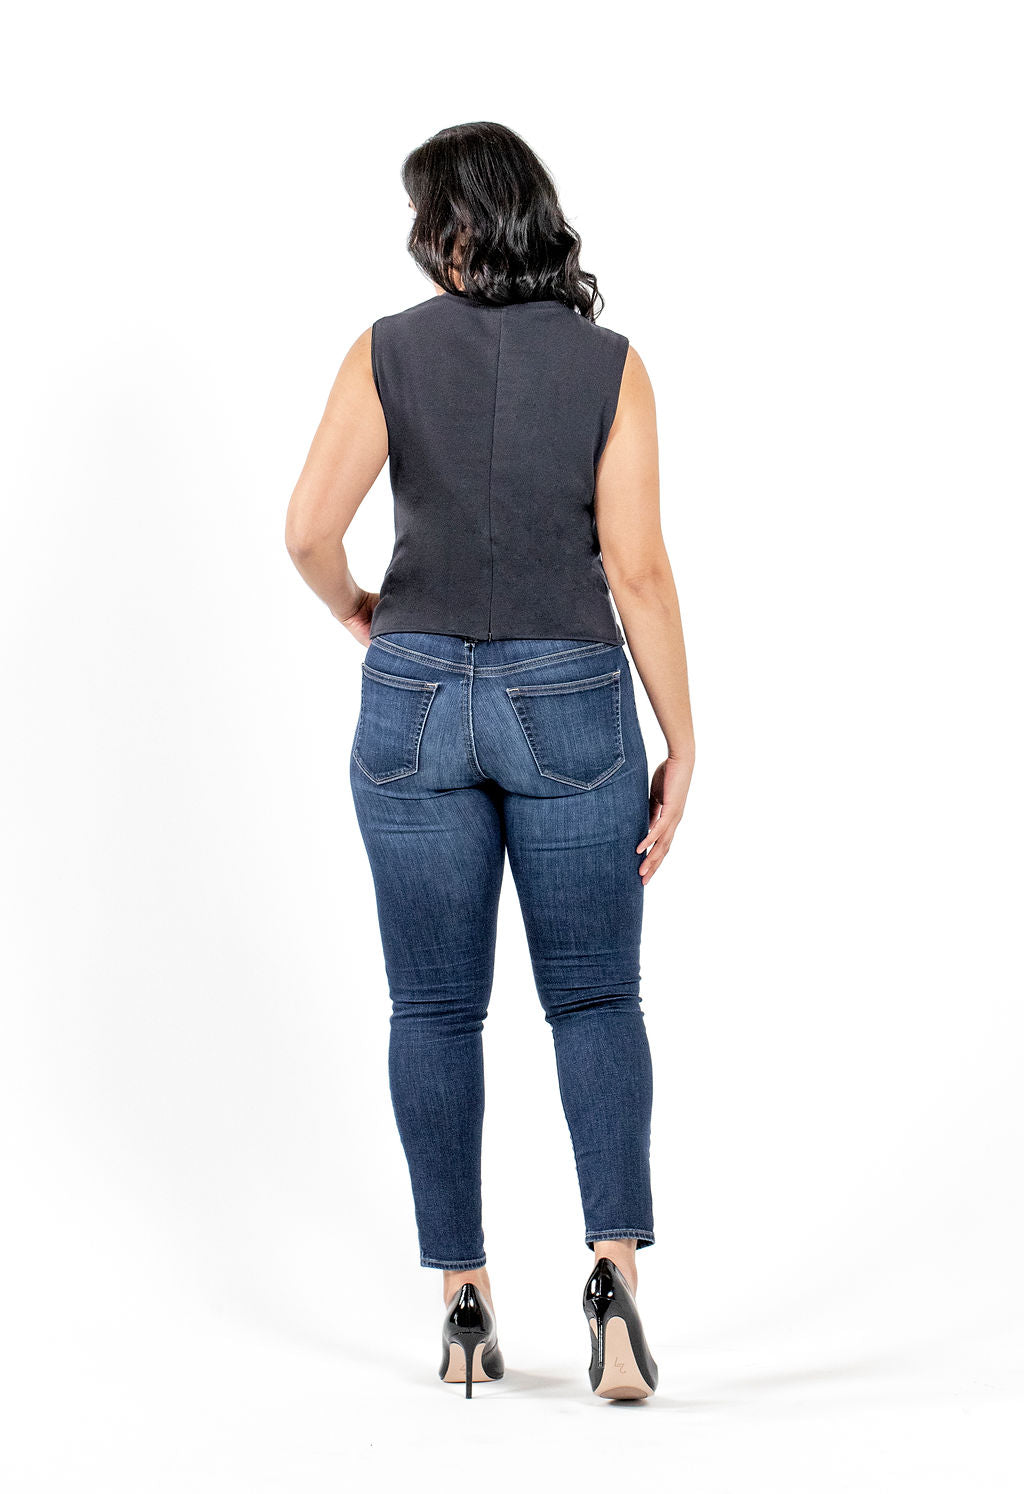 back view of sustainable sleeveless professional black blouse and jeans